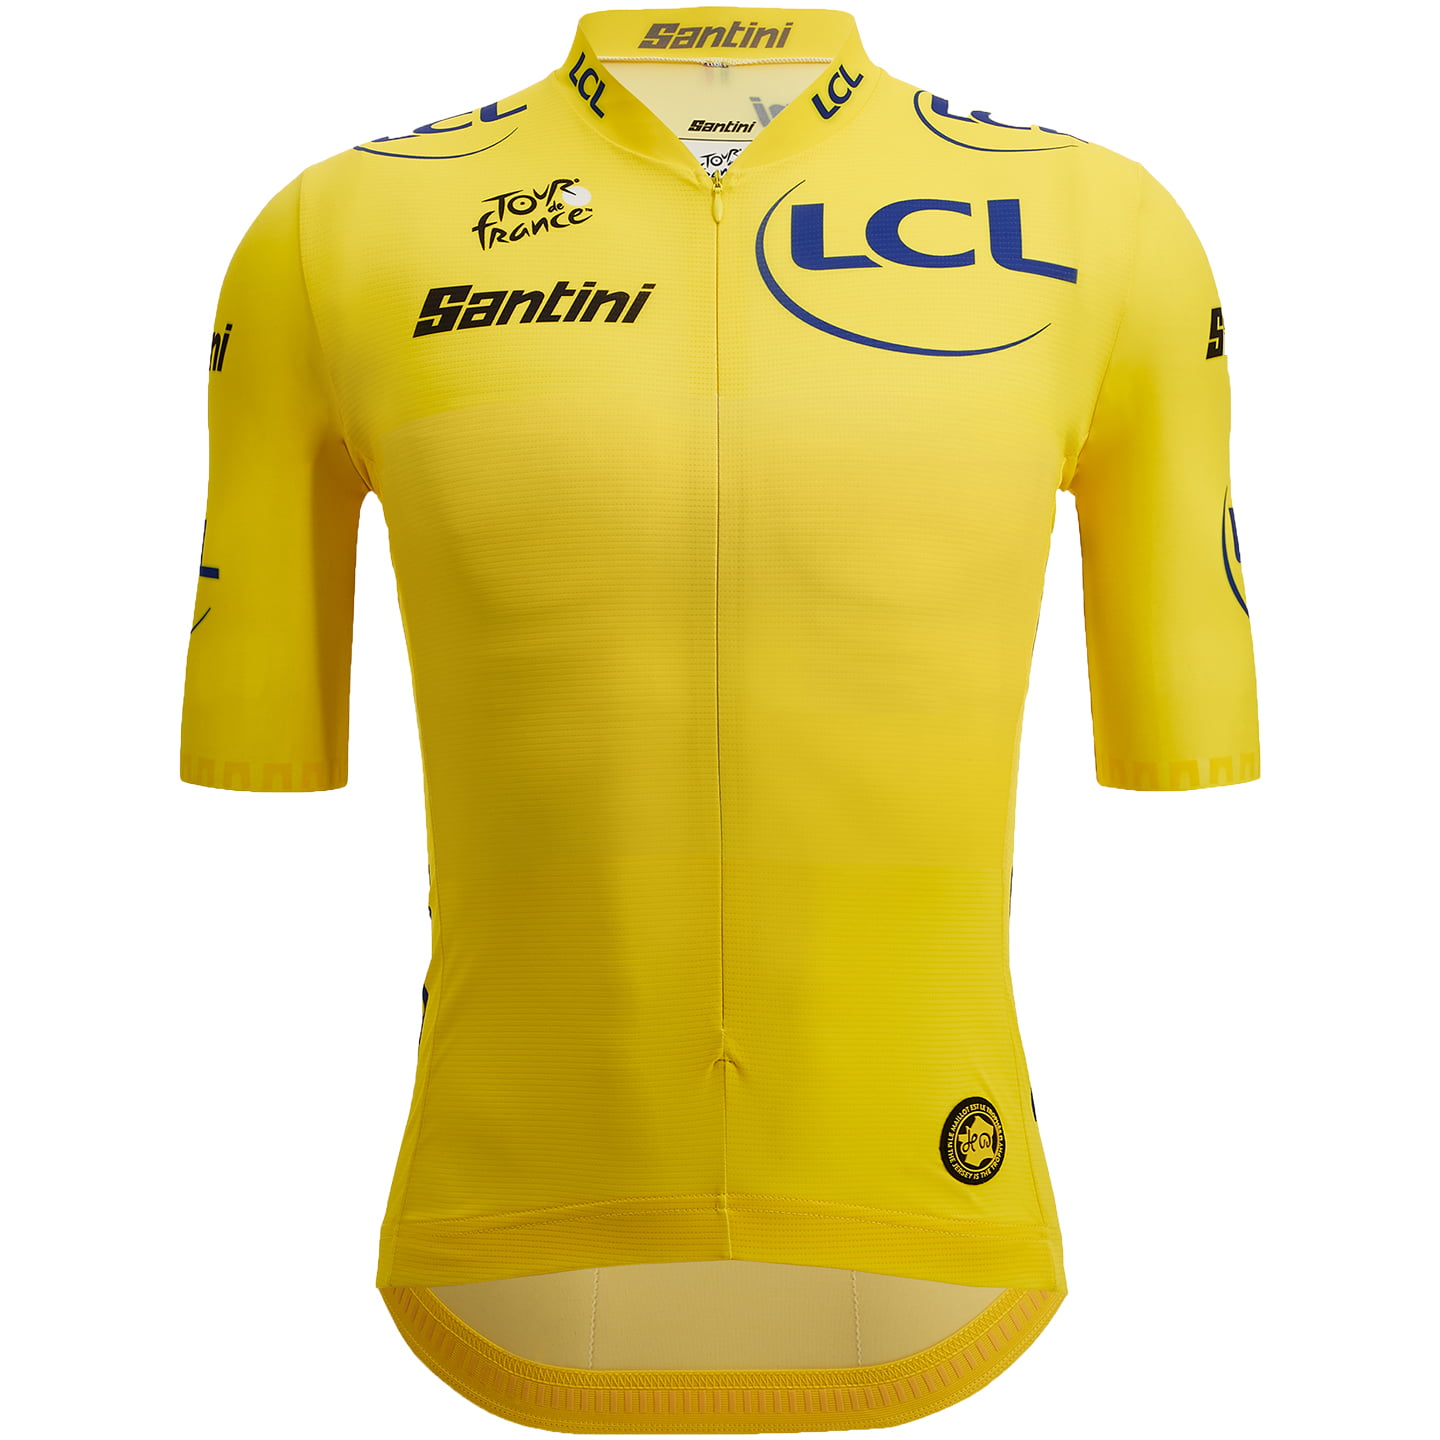 TOUR DE FRANCE Race Yellow Jersey 2023 Short Sleeve Jersey, for men, size S, Cycling jersey, Cycling clothing